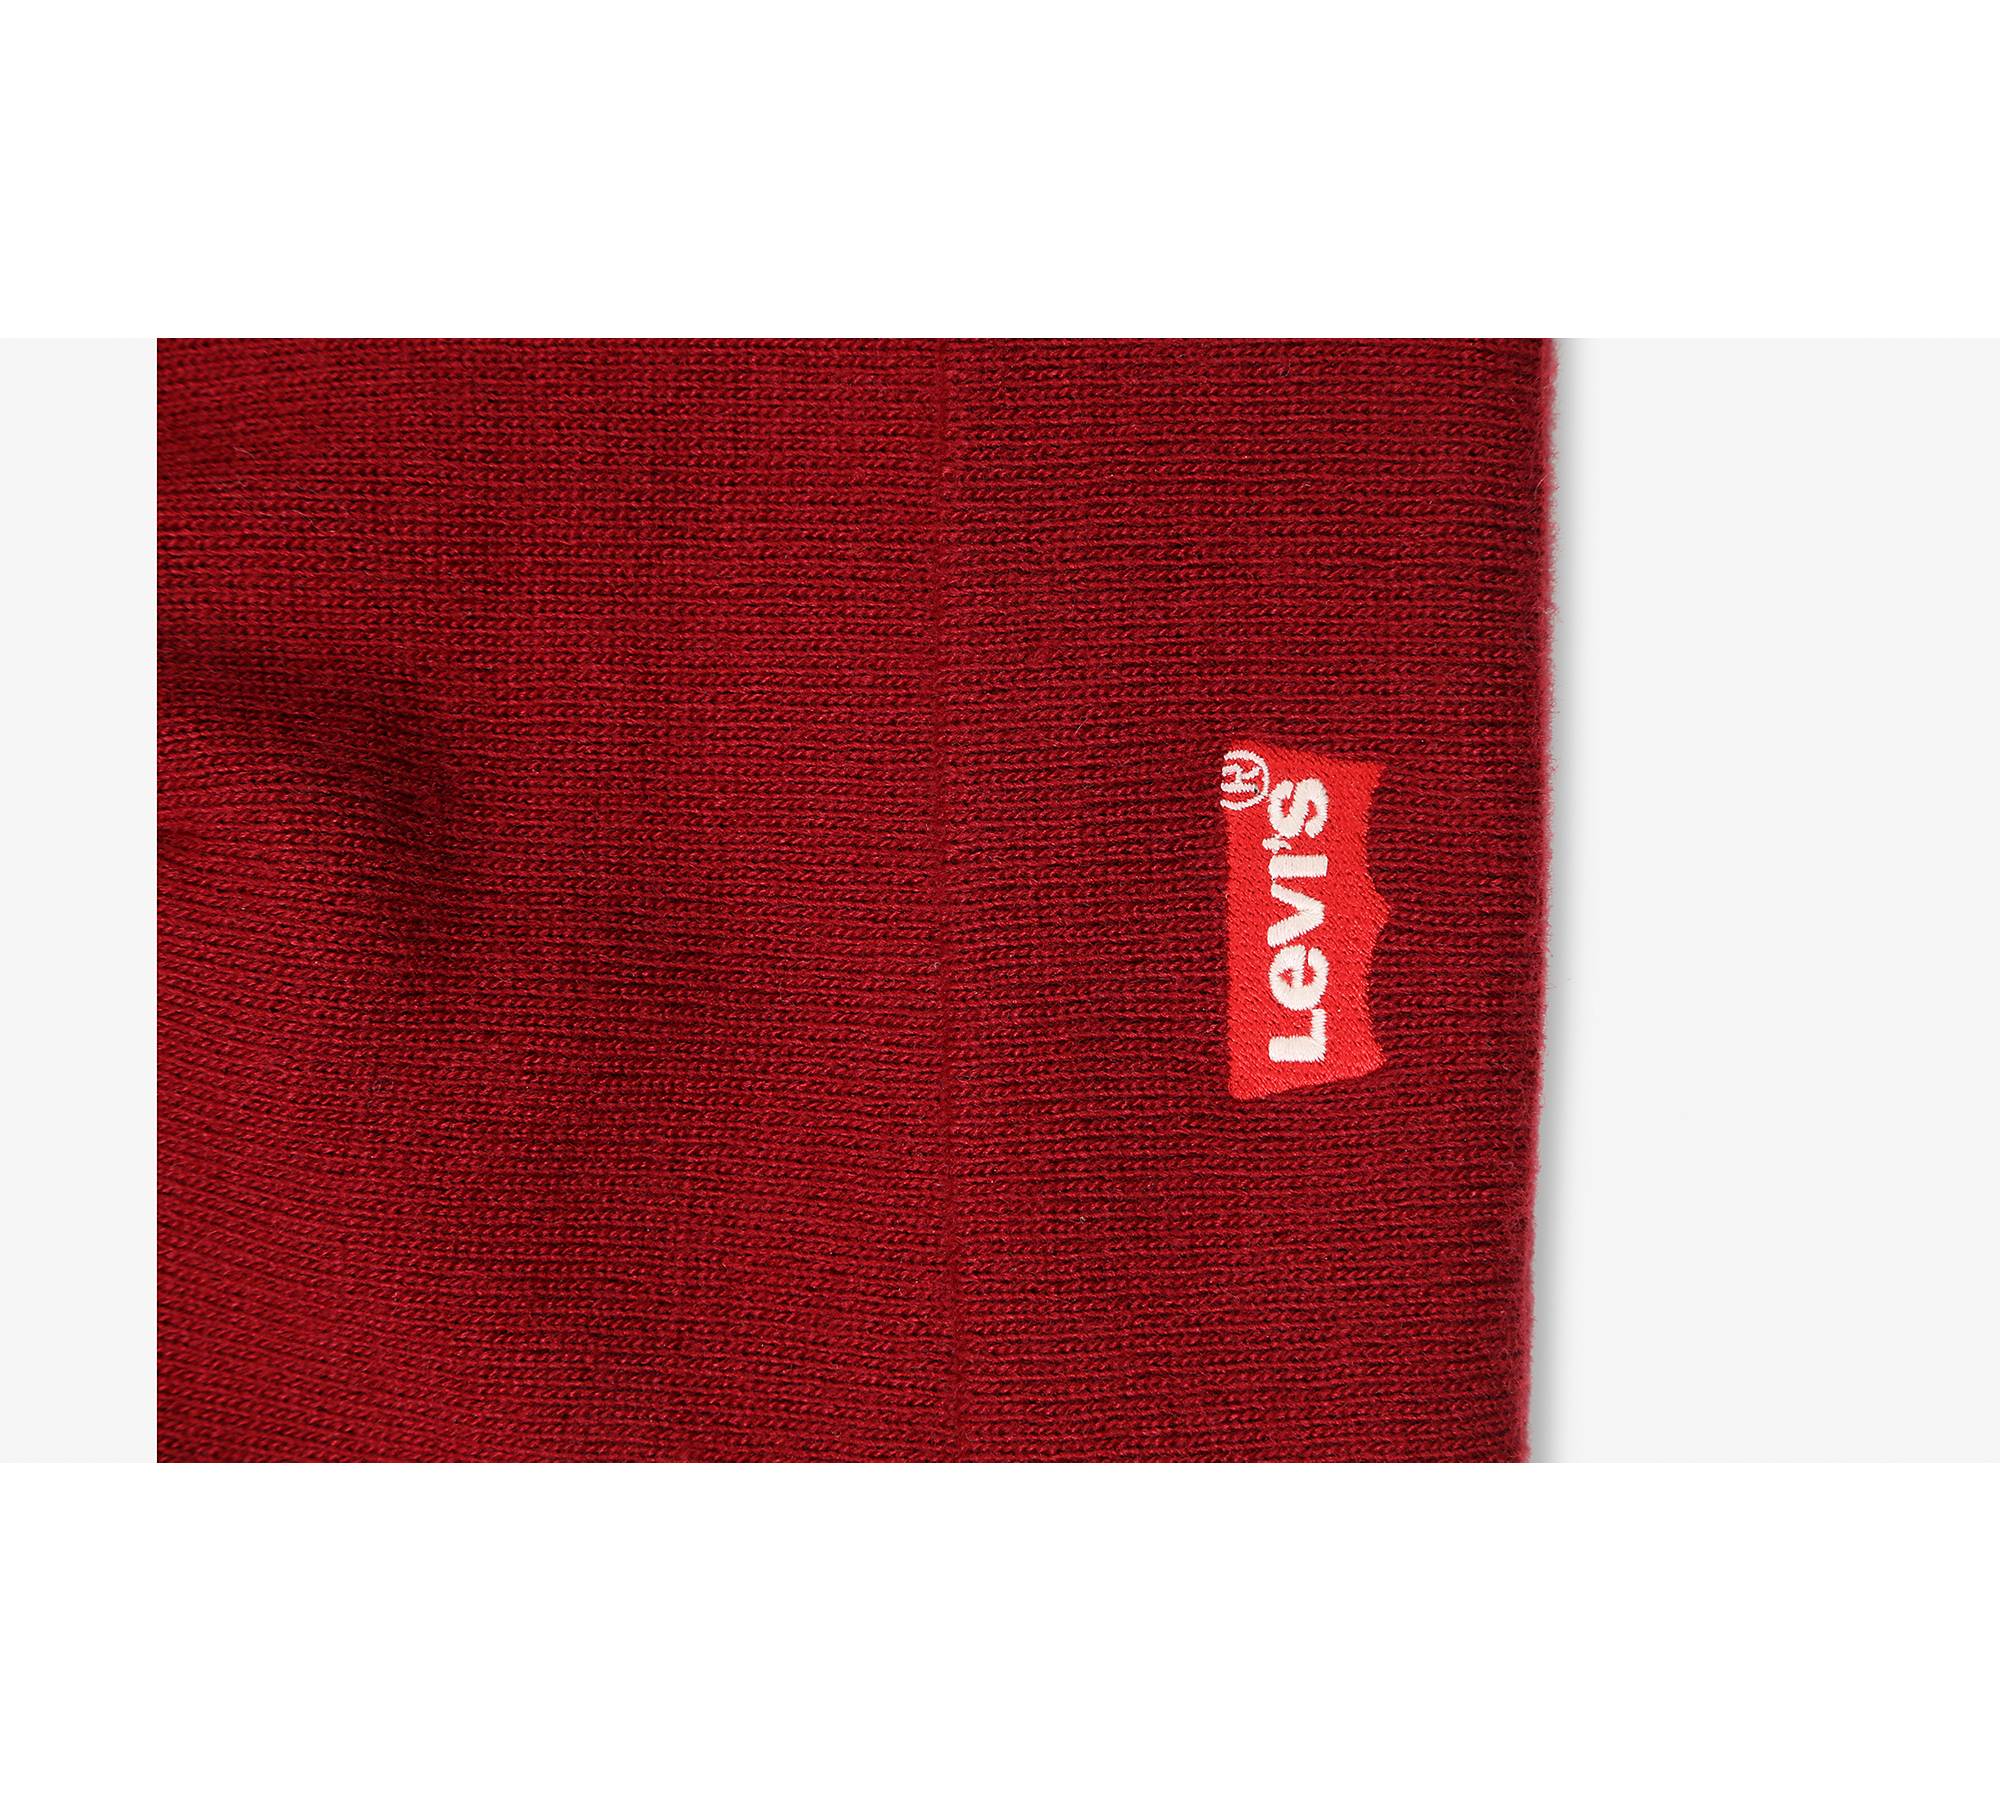 Levi's New Slouchy Beanie W Red - Bonnet - Homme